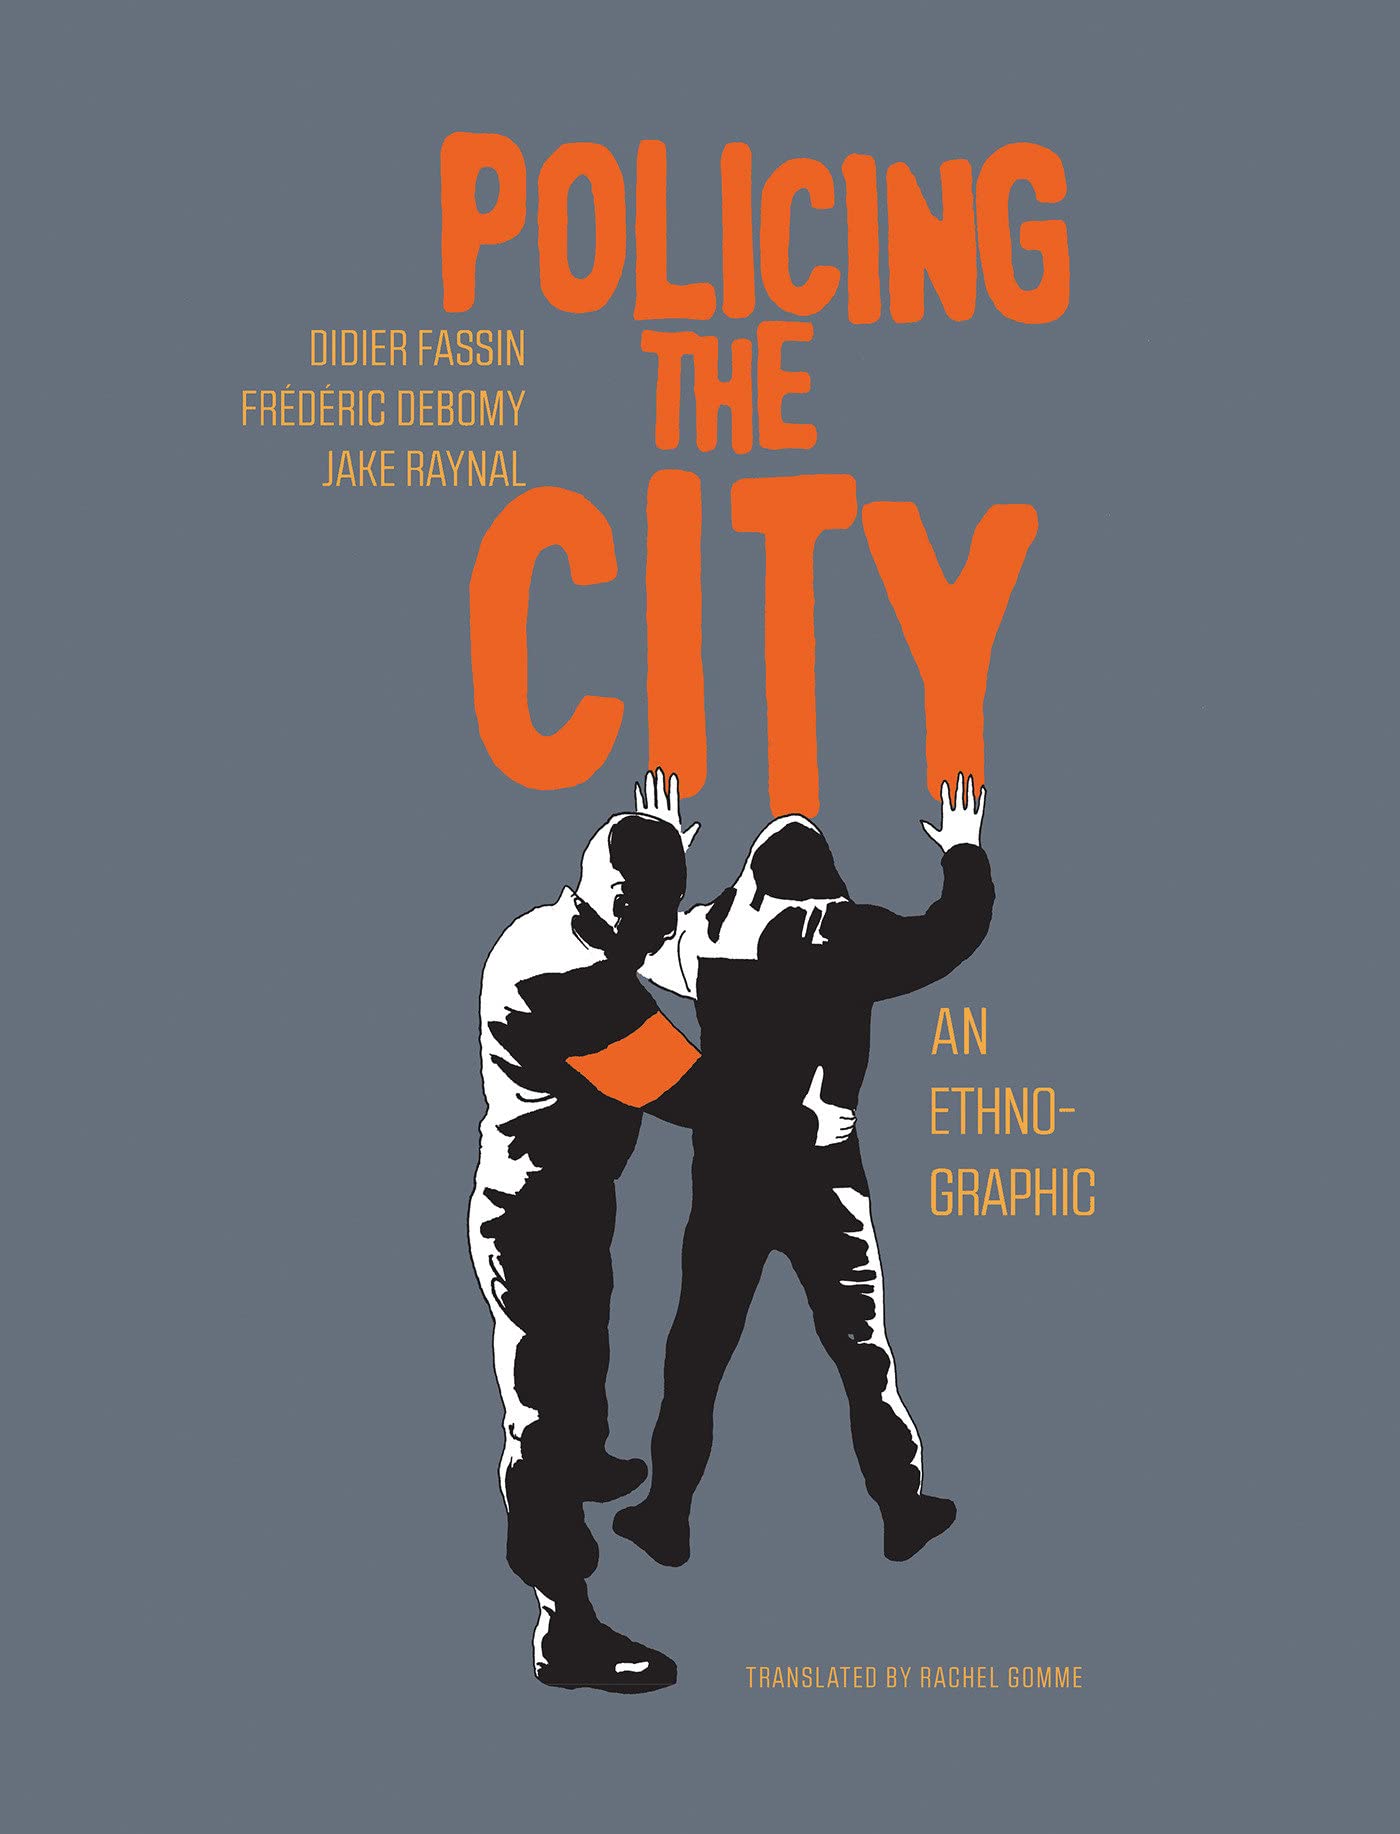 Policing The City An Ethno-Graphic